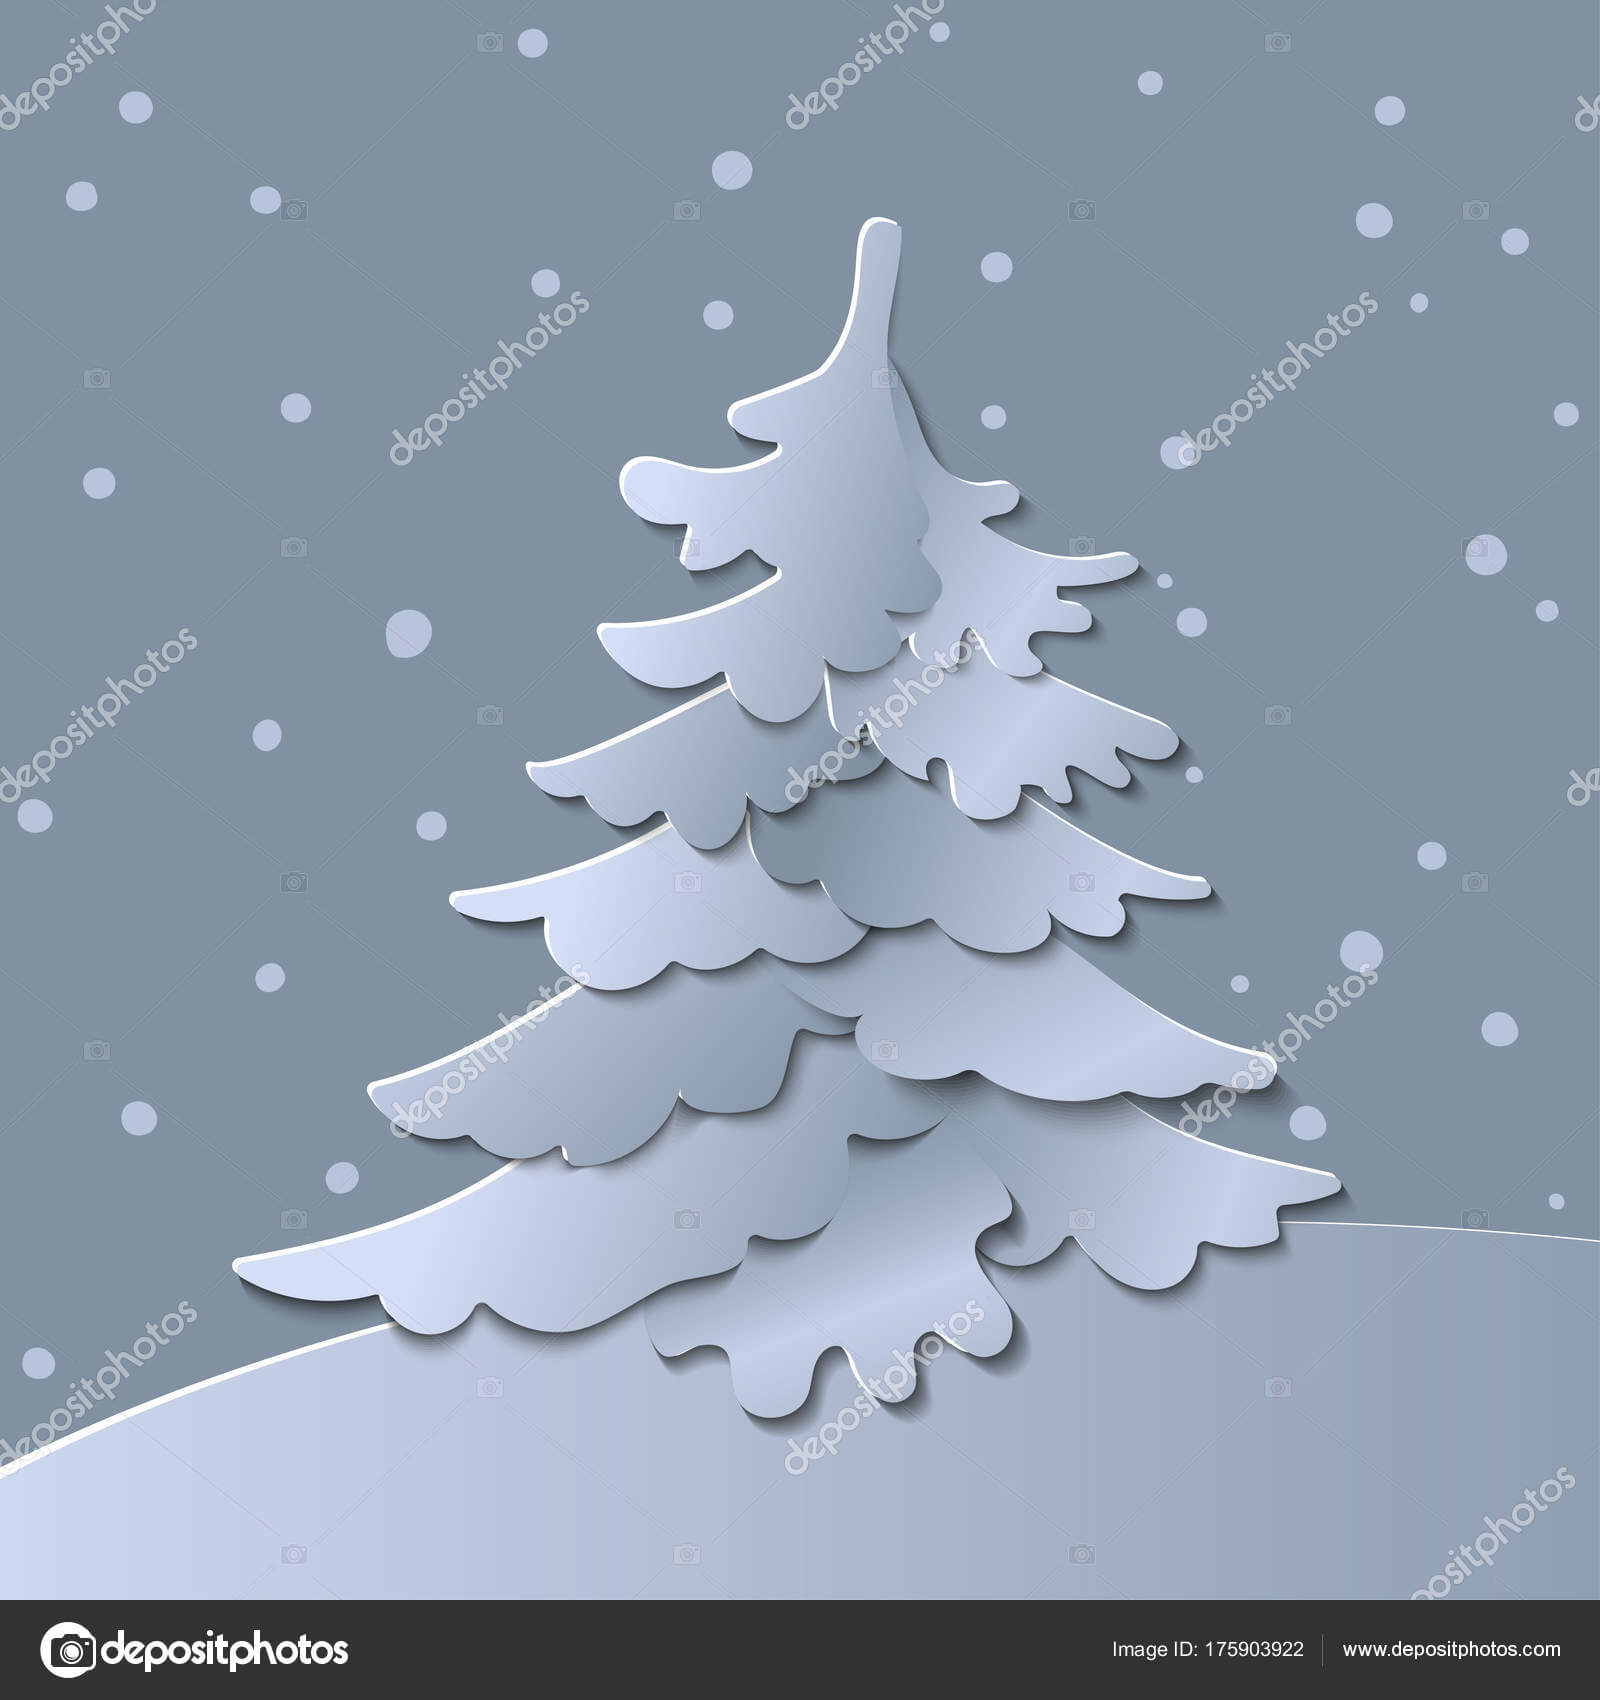 3D Abstract Paper Cut Illustration Of Christmas Tree. Vector Pertaining To 3D Christmas Tree Card Template